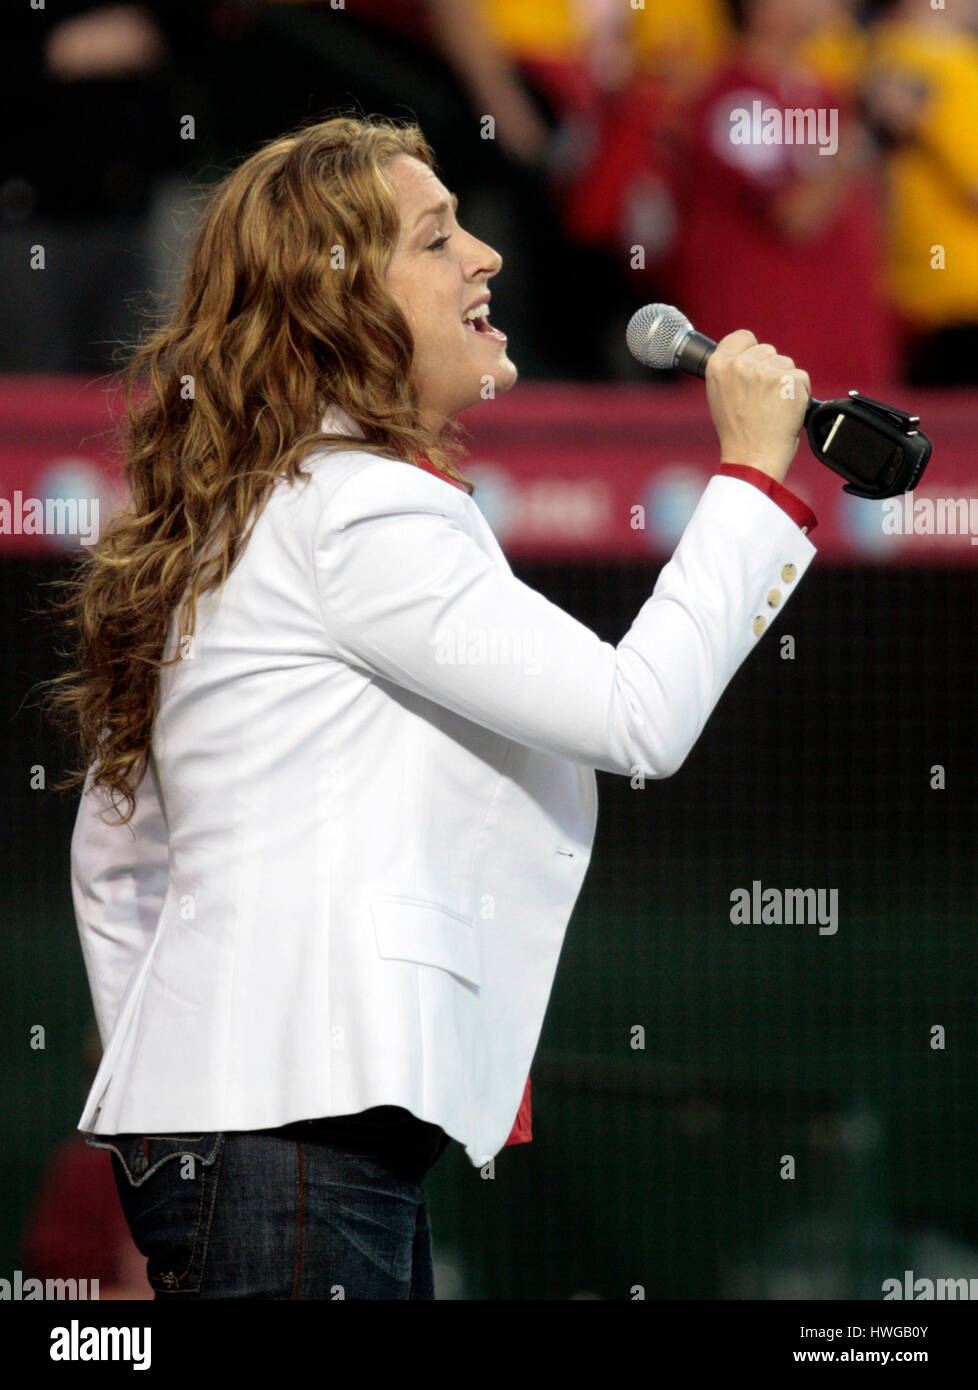 Actress Joely Fisher sings the National Anthem before a baseball game with the Los Angeles Angels and the Texas Rangers in Anaheim, Calif., on Monday, April 2, 2007. Photo by Francis Specker Stock Photo